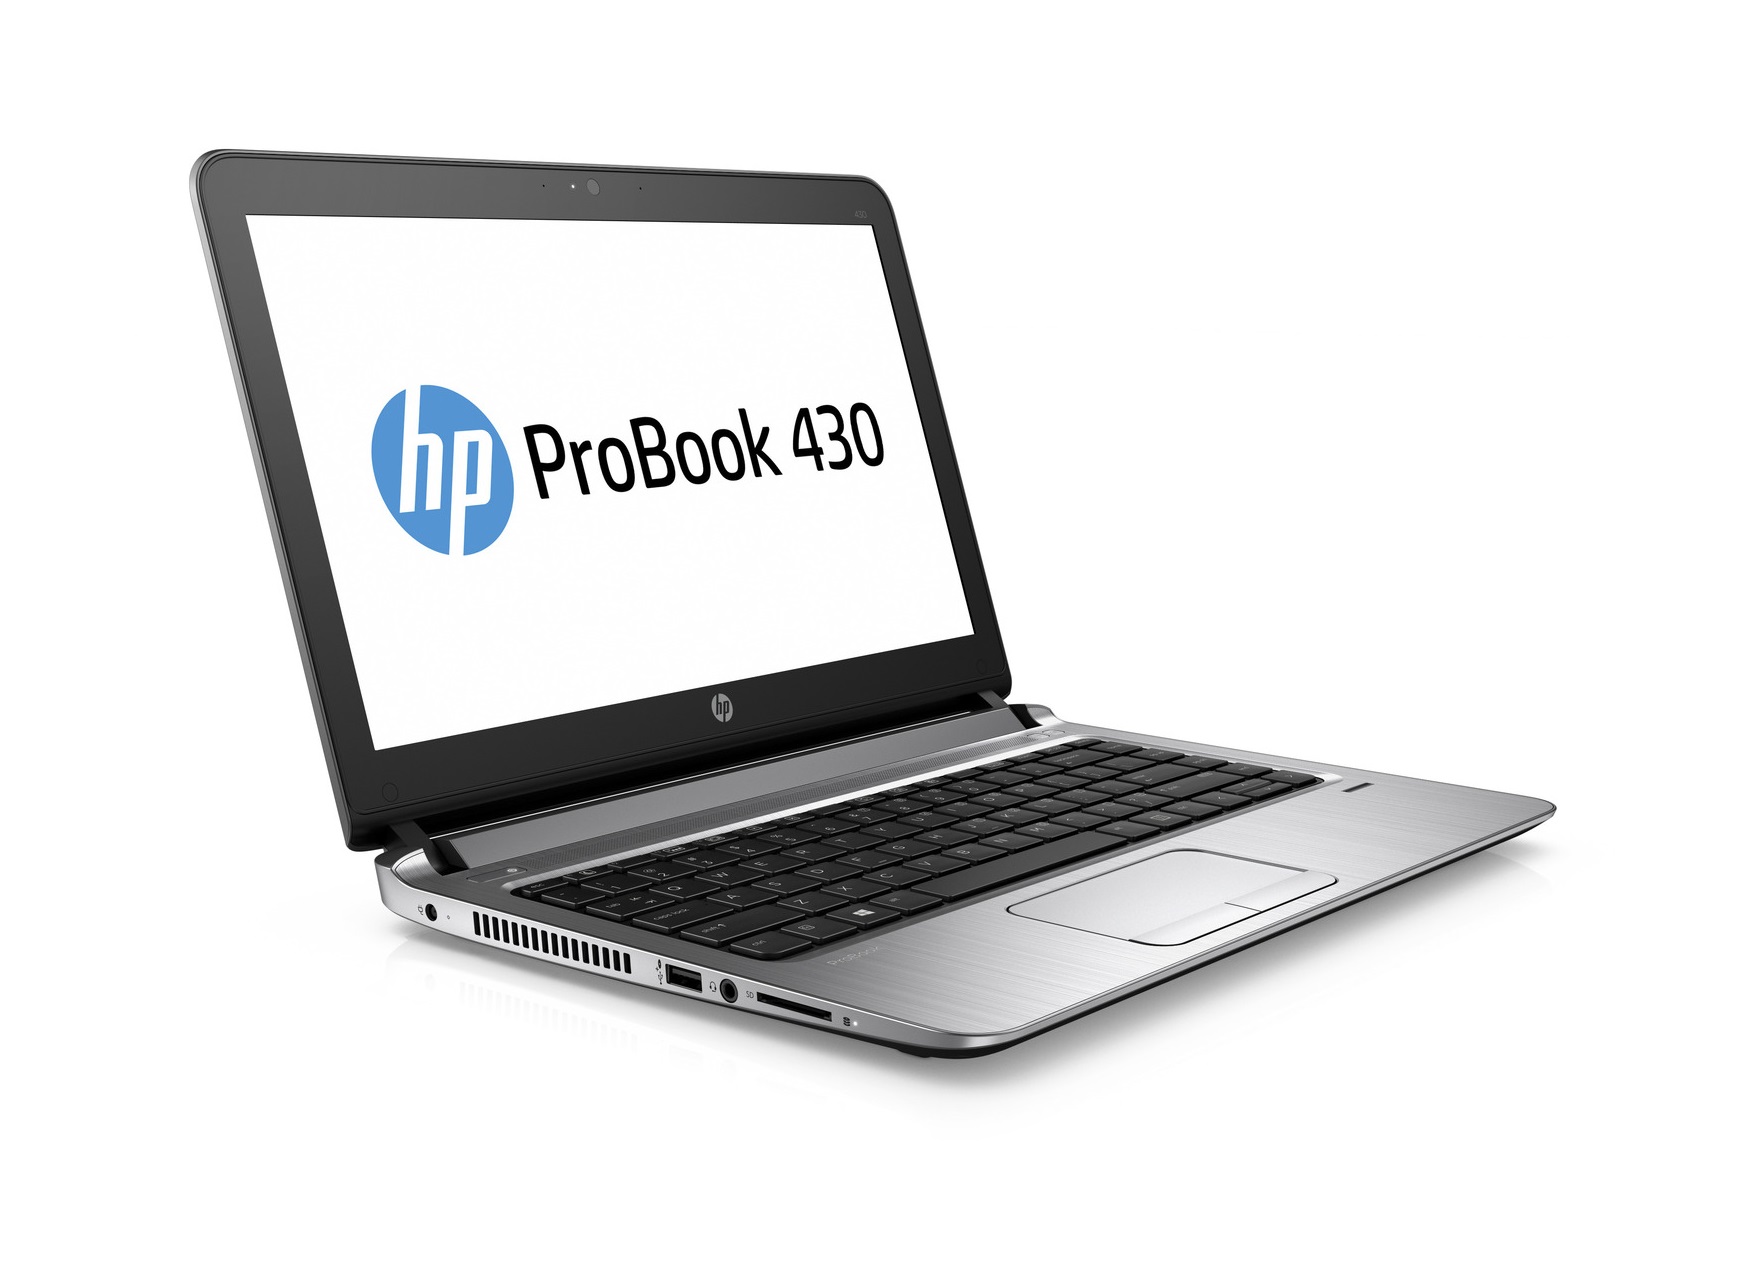 ProBook 430 G3 Notebook PC (ENERGY STAR) - image 2 of 7